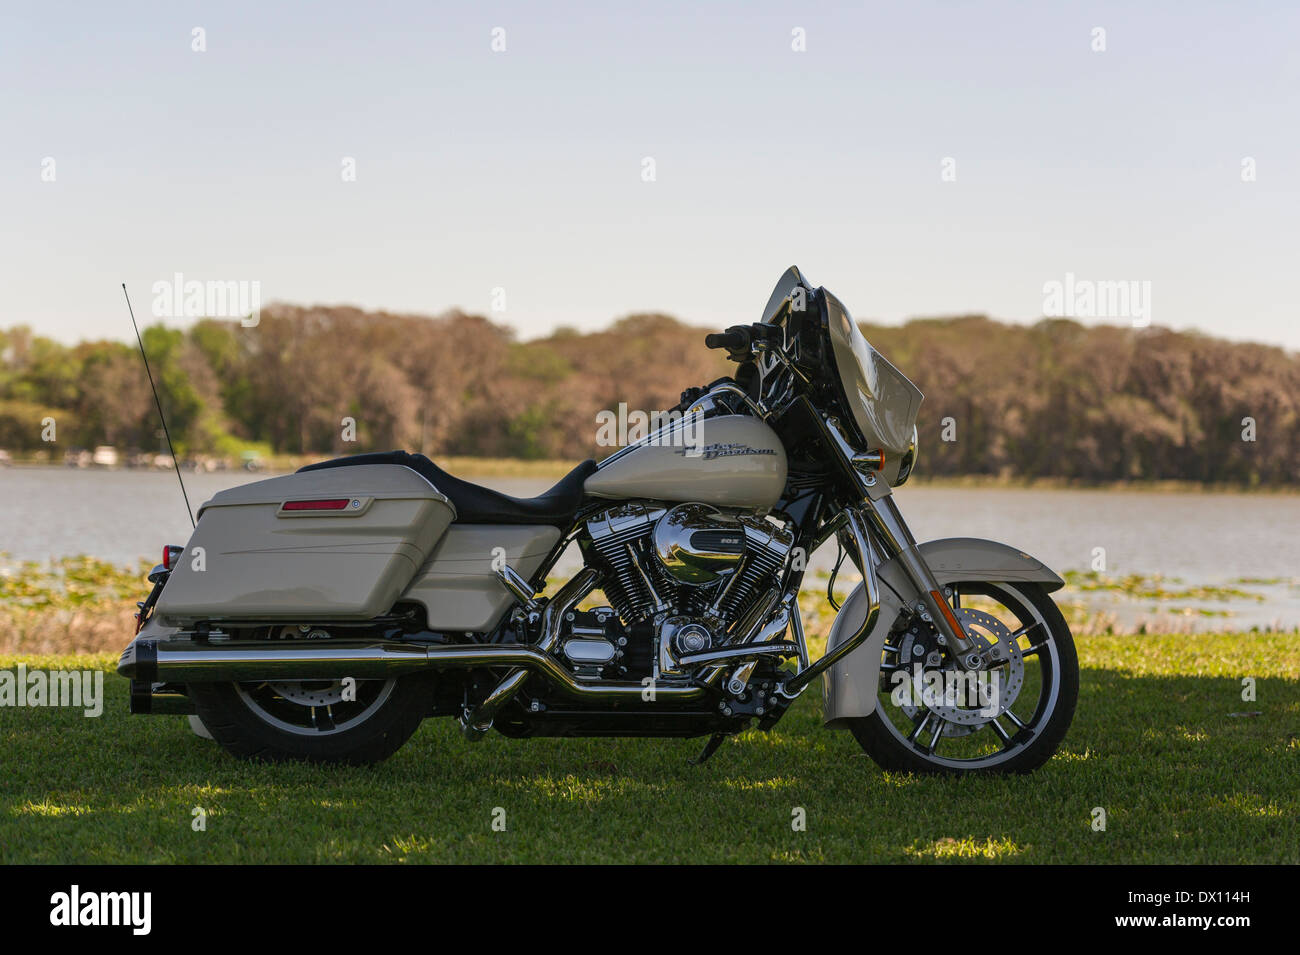 Harley Davidson 2014 Street Glide Special Motorcycle Stock Photo